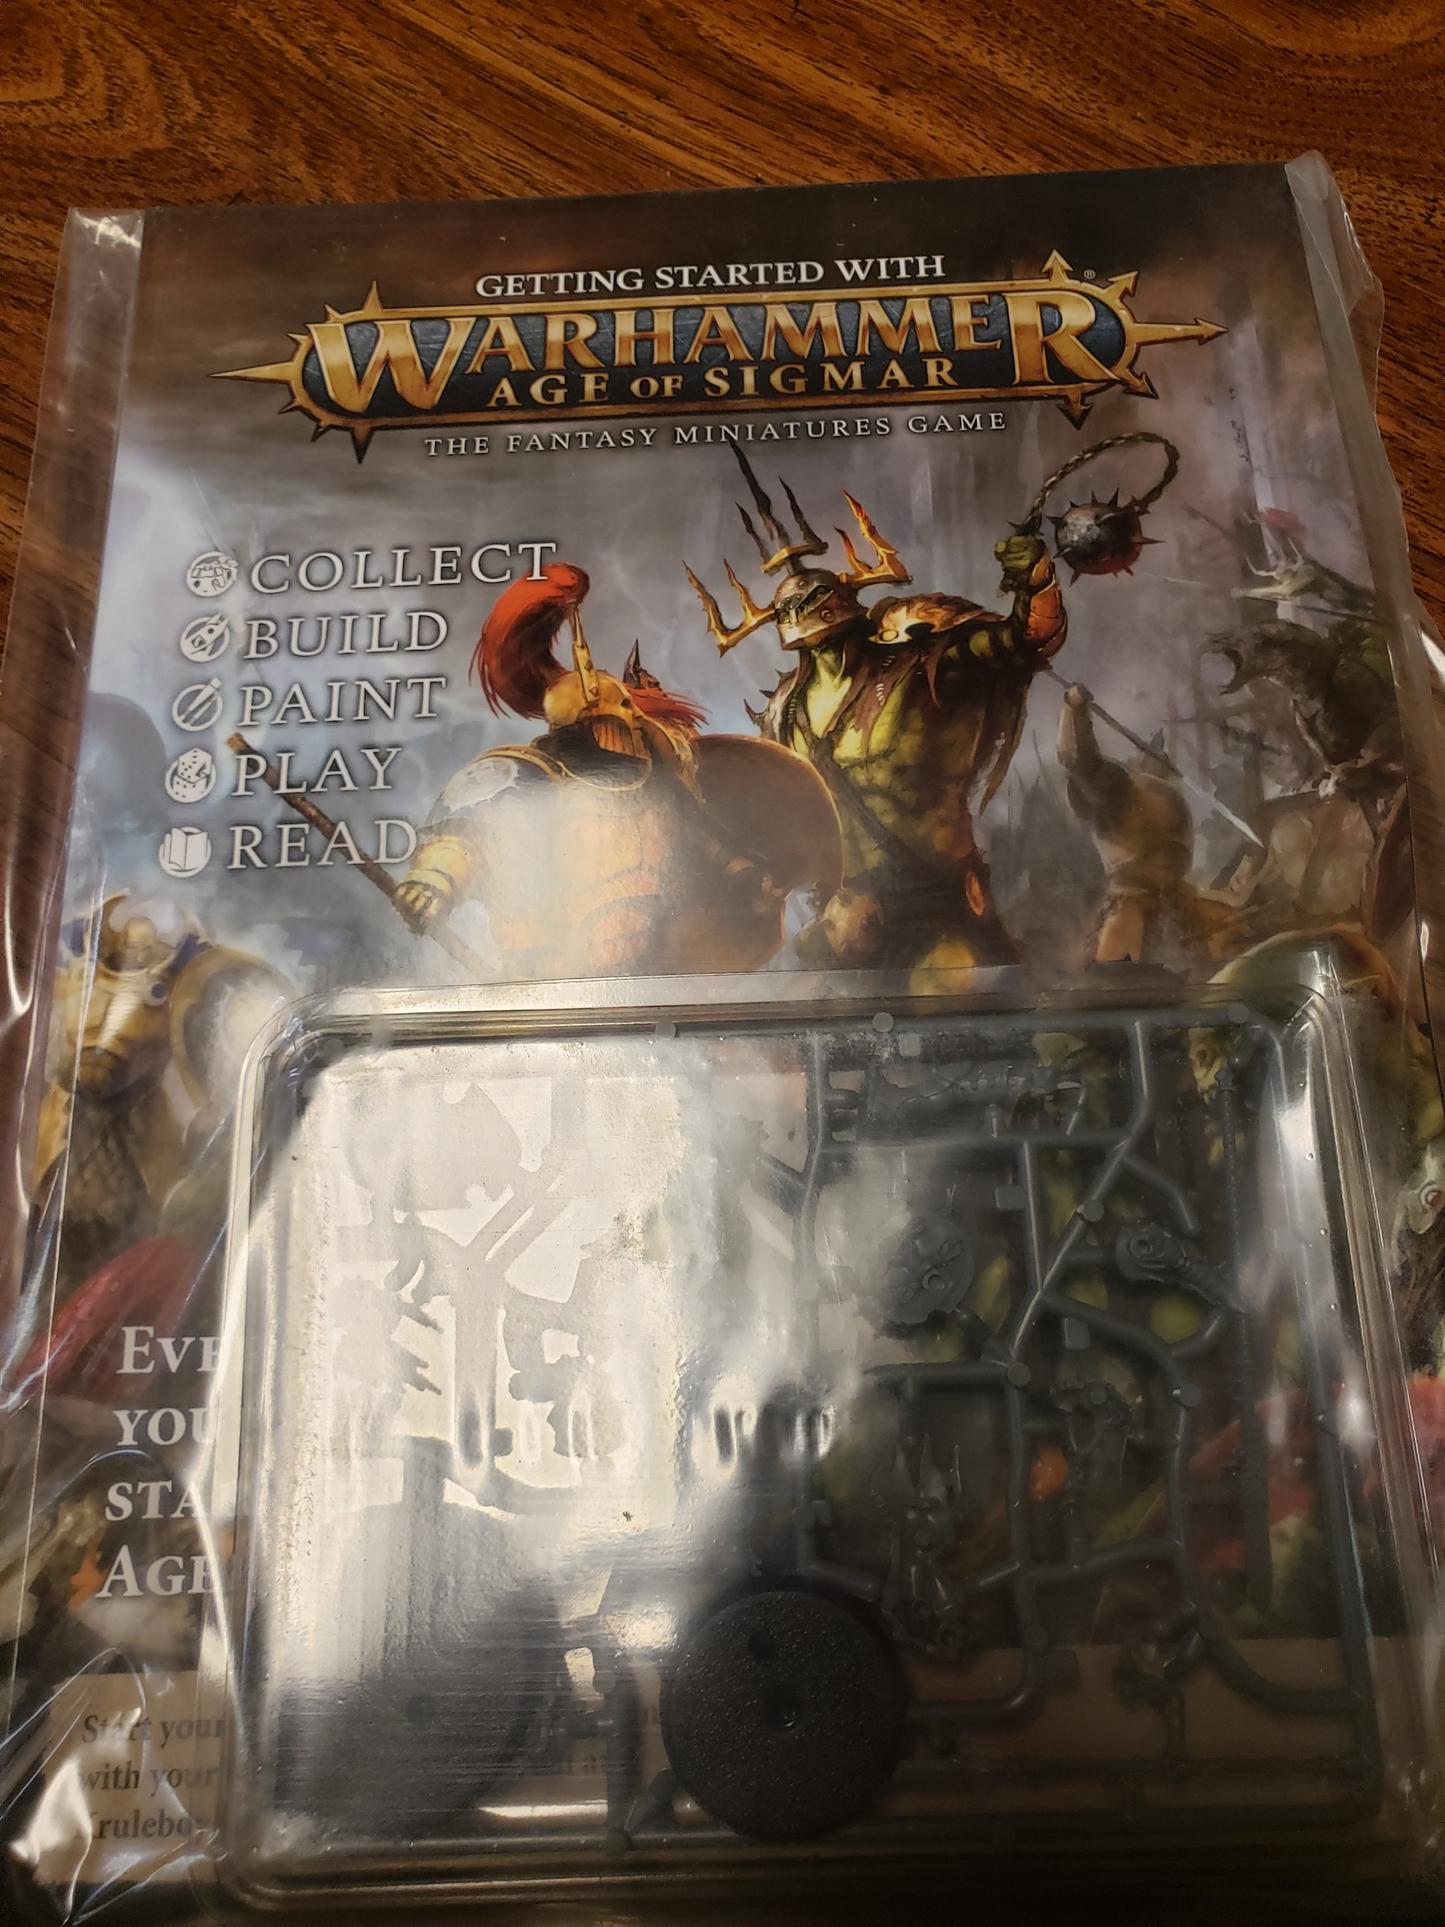 Warhammer Age Of Sigmar-Getting Started With (80-16)